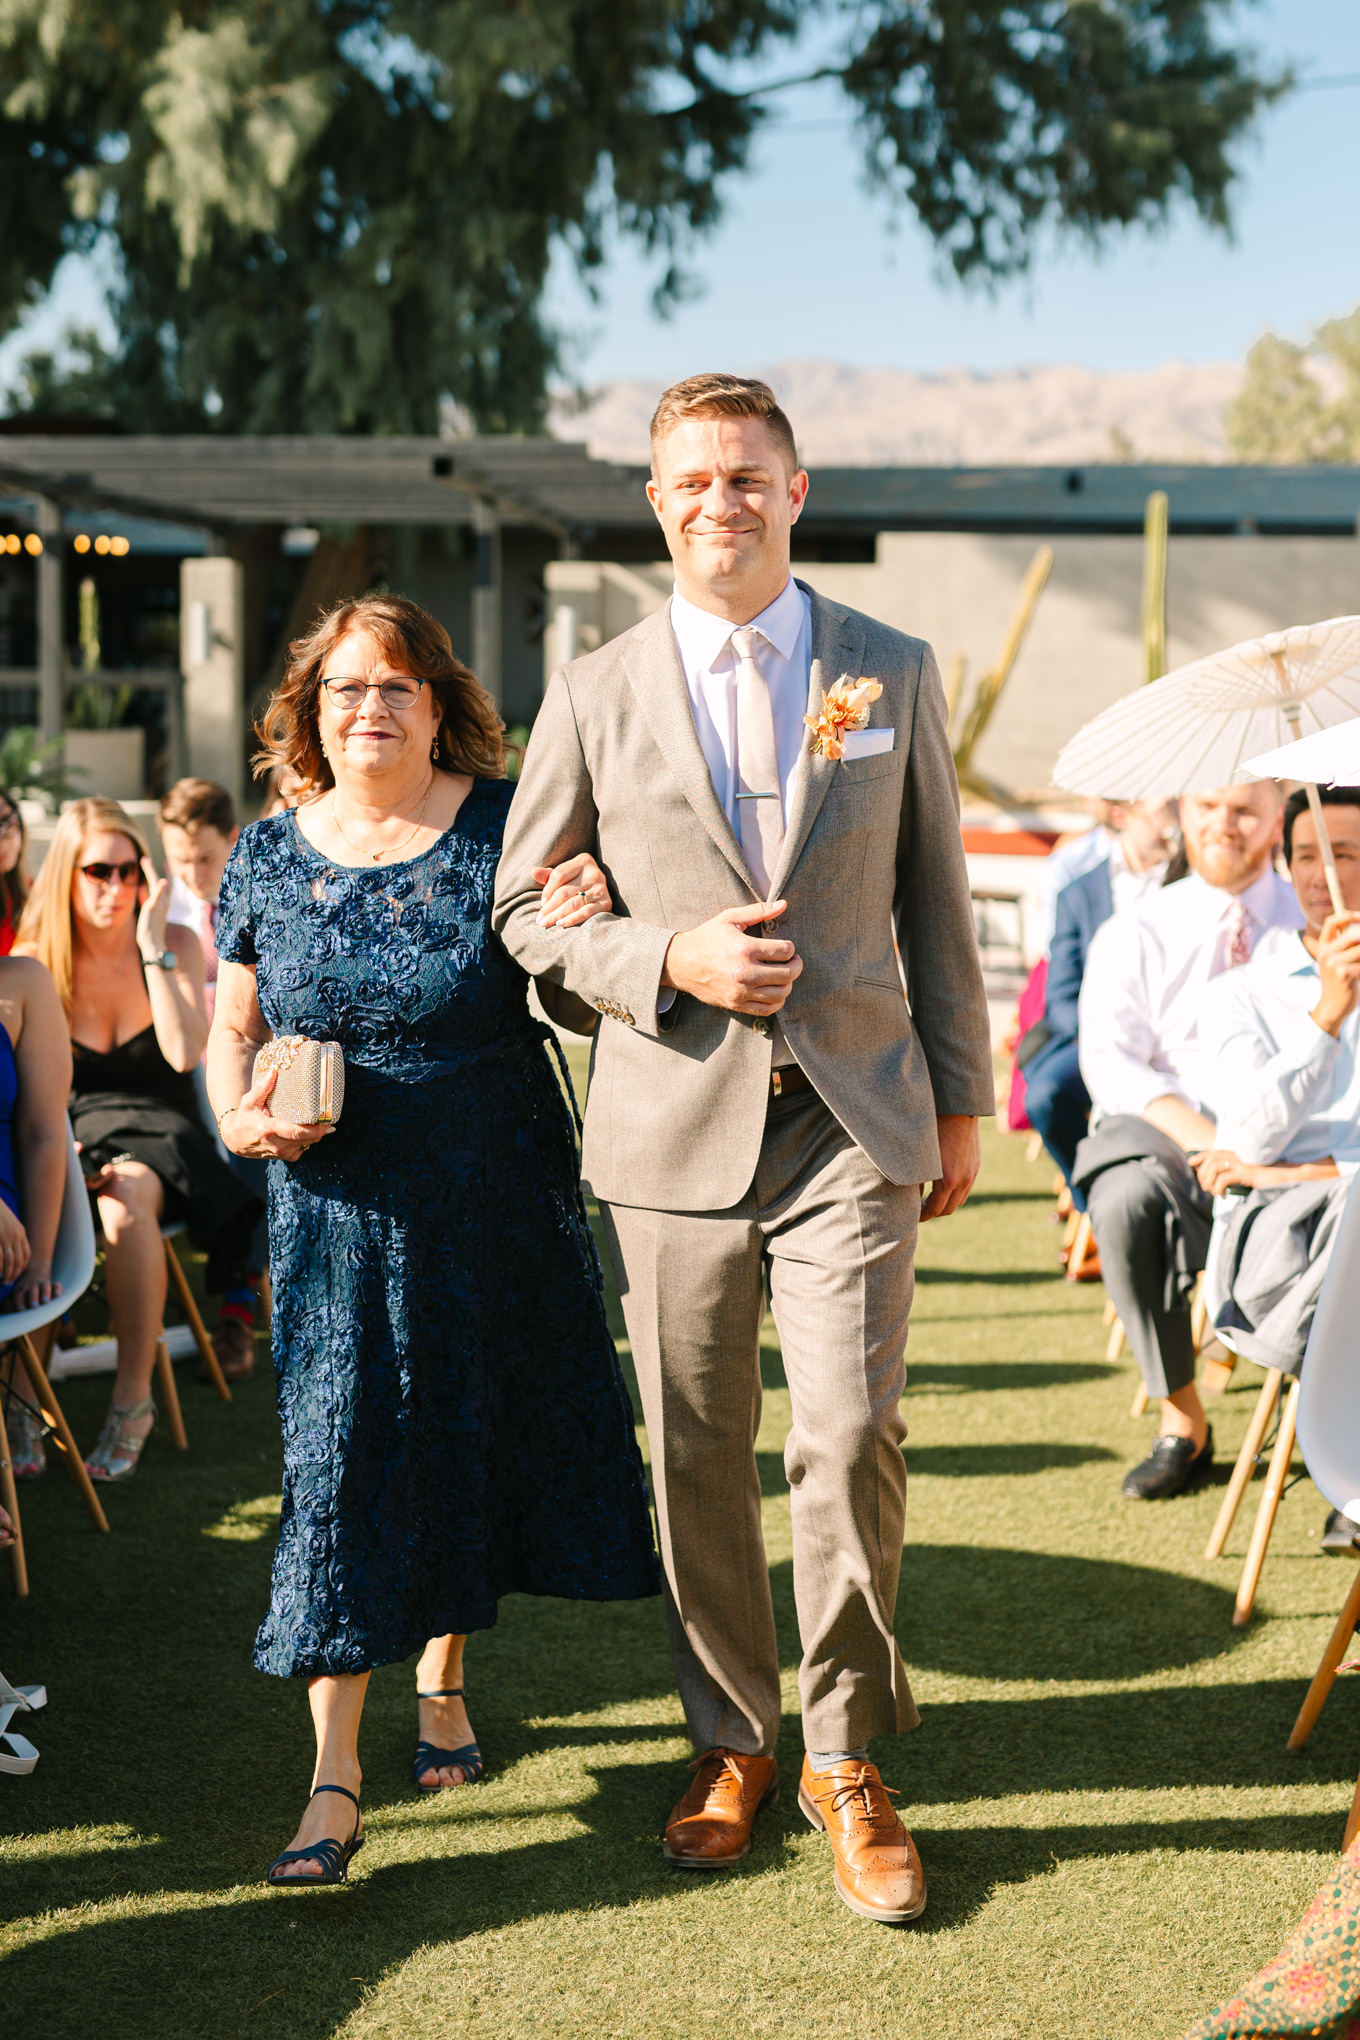 Groom walking with mom down the aisle | Pink and orange Lautner Compound wedding | Colorful Palm Springs wedding photography | #palmspringsphotographer #palmspringswedding #lautnercompound #southerncaliforniawedding  Source: Mary Costa Photography | Los Angeles